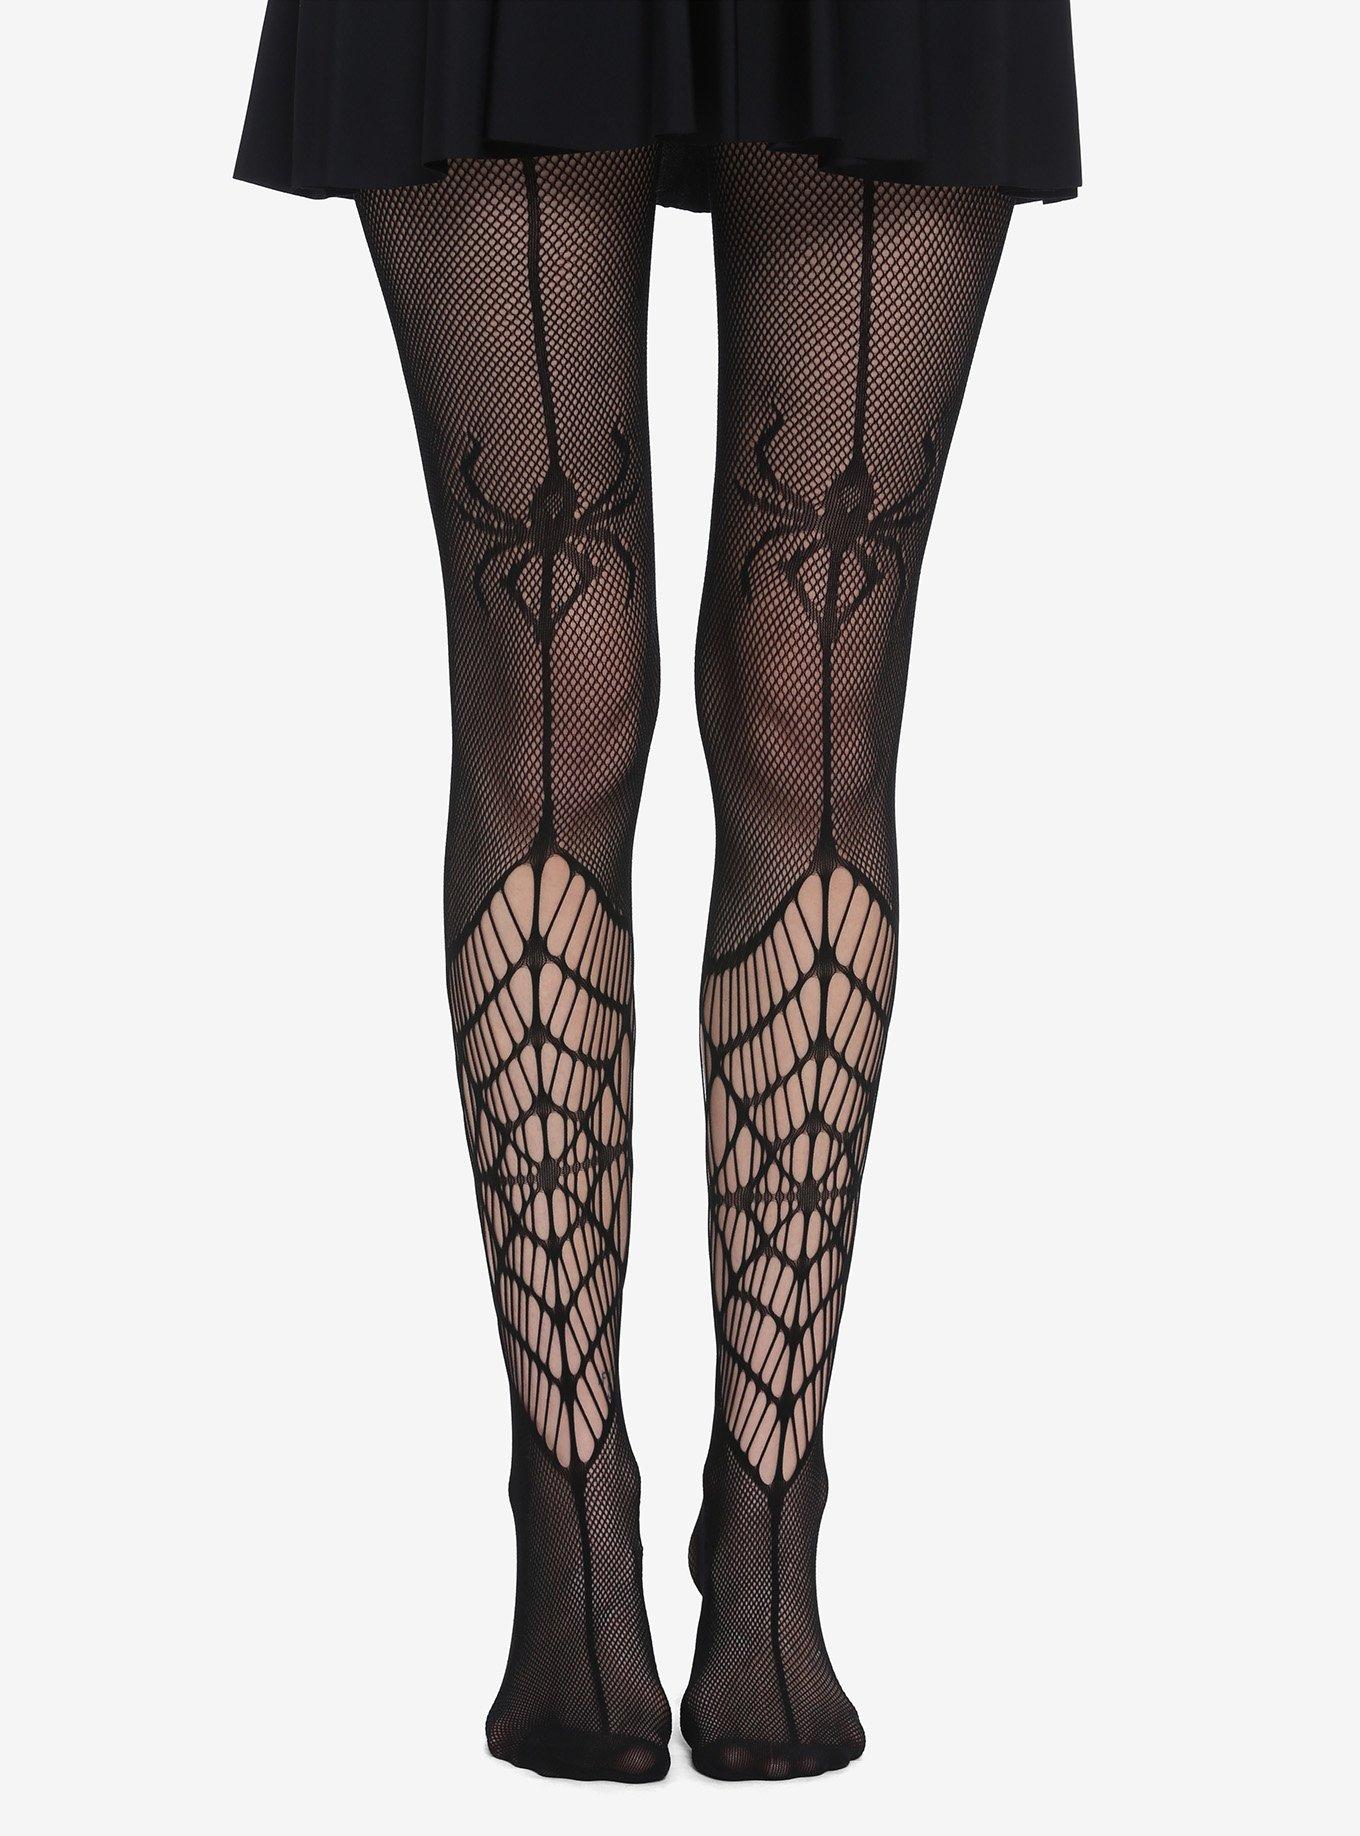 NUOBESTY Spiderweb Stockings Fishnet Tights Halloween Black Lace Spider Web  Pantyhose for Women Ladies at  Women's Clothing store